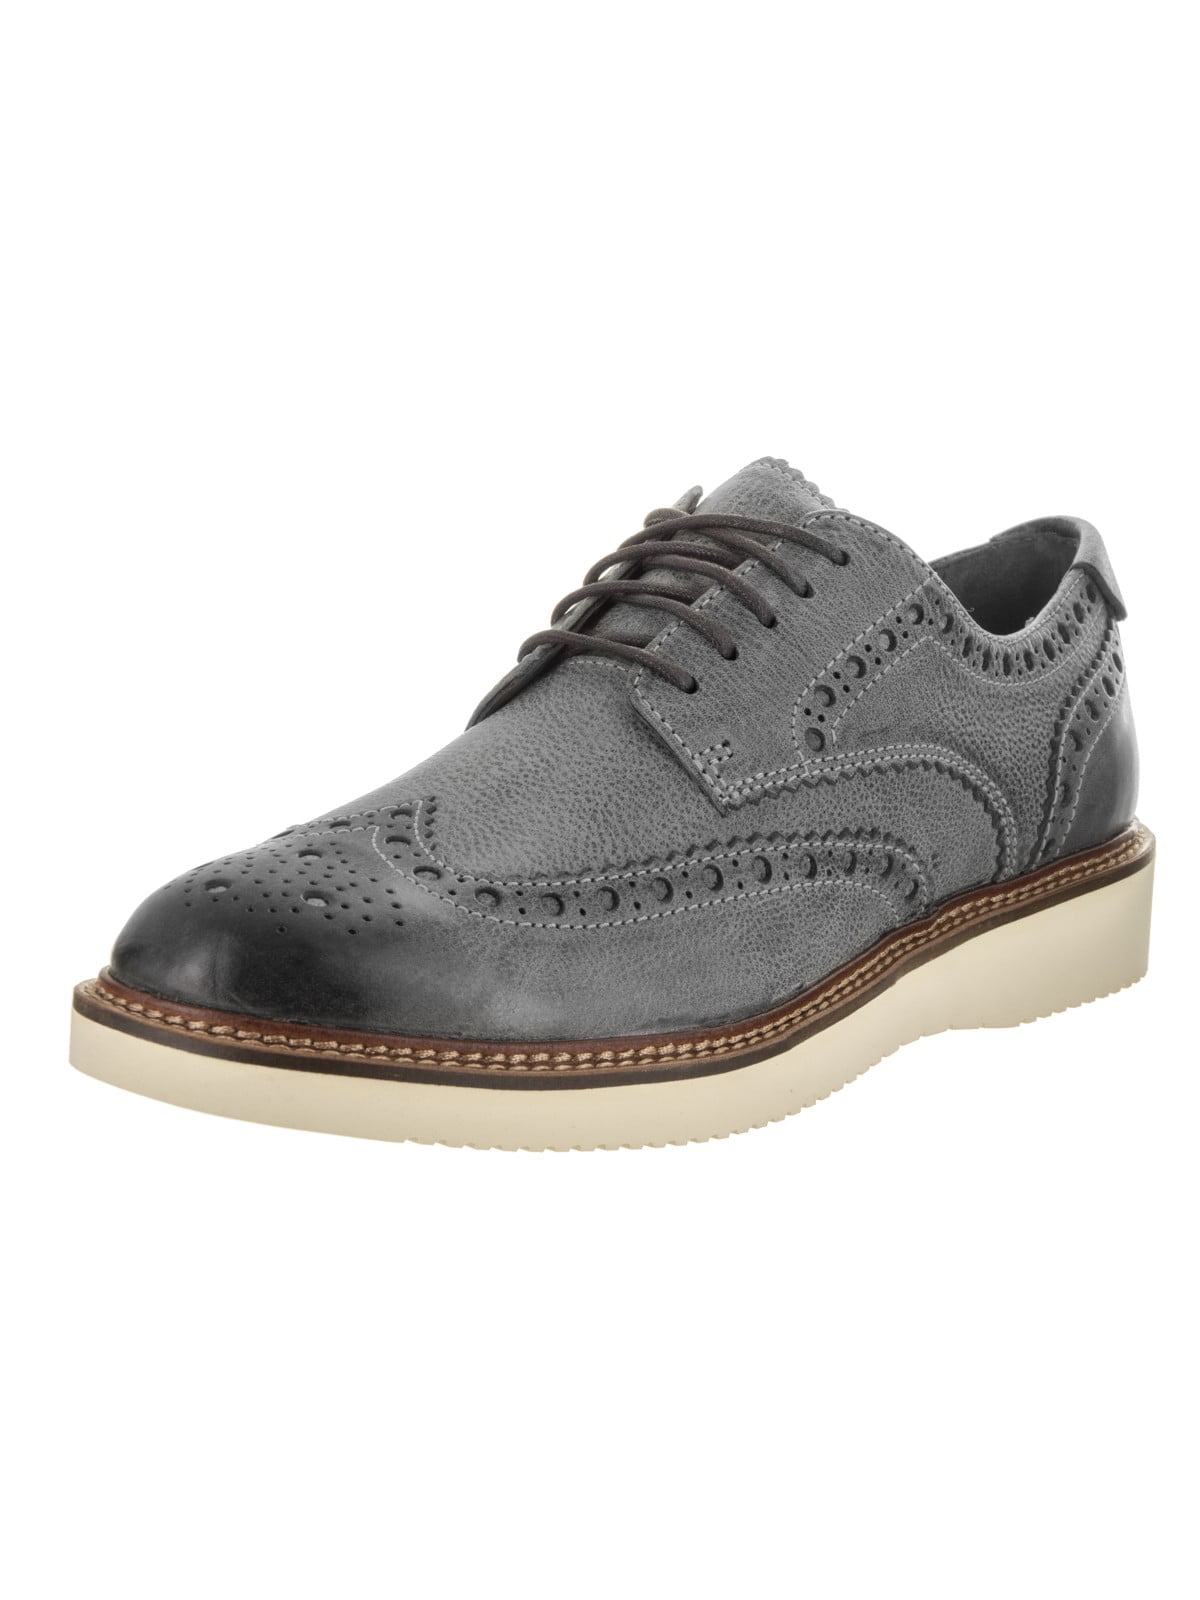 sperry wingtip shoes